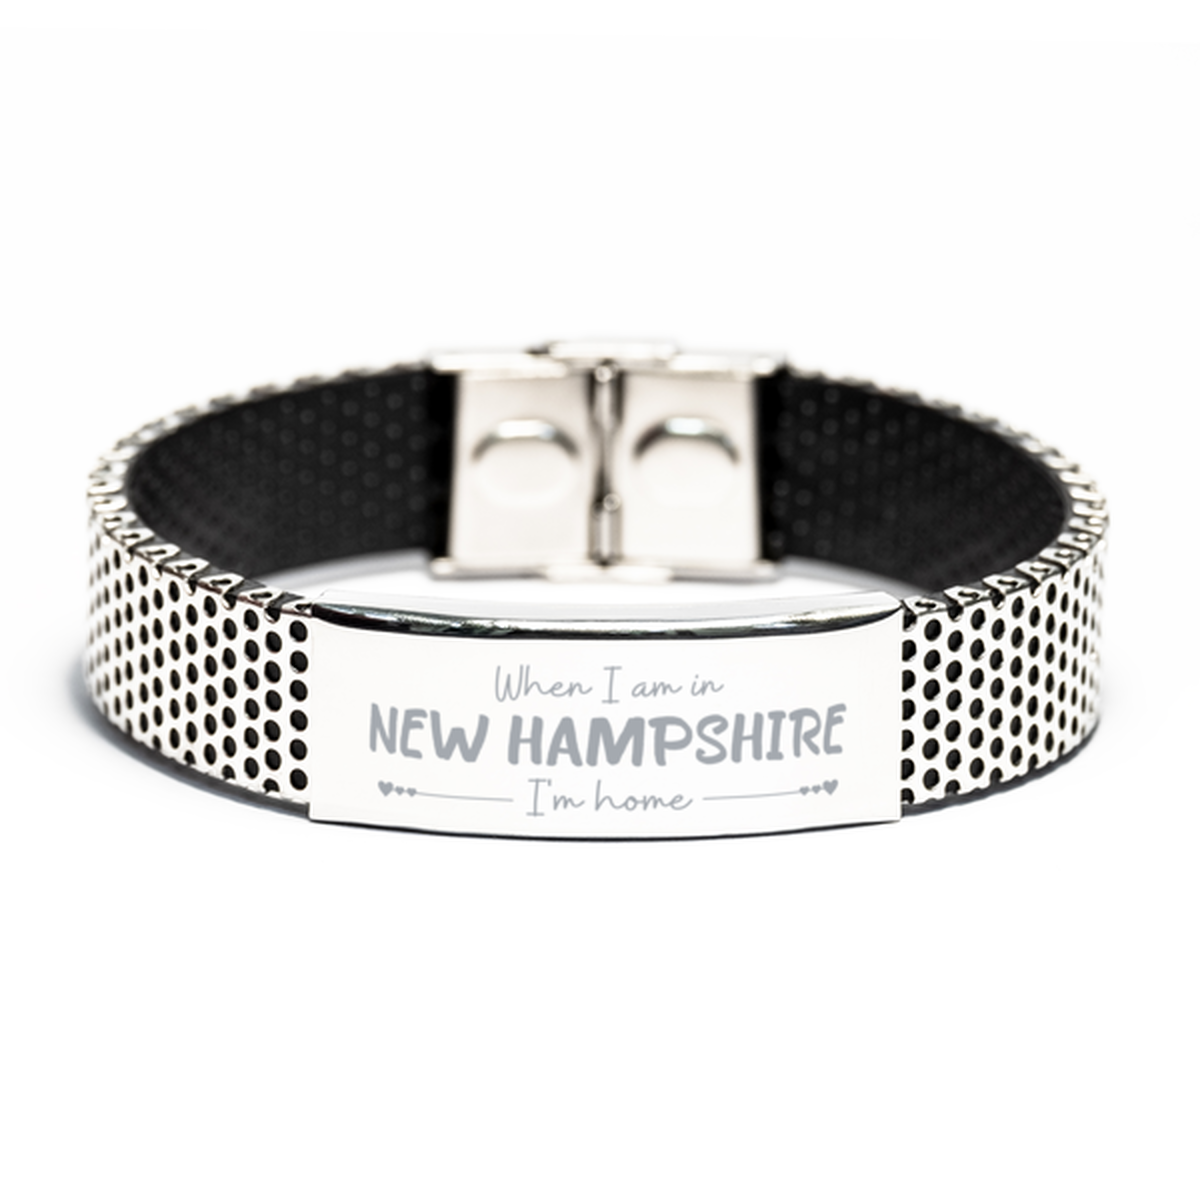 When I am in New Hampshire I'm home Stainless Steel Bracelet, Cheap Gifts For New Hampshire, State New Hampshire Birthday Gifts for Friends Coworker